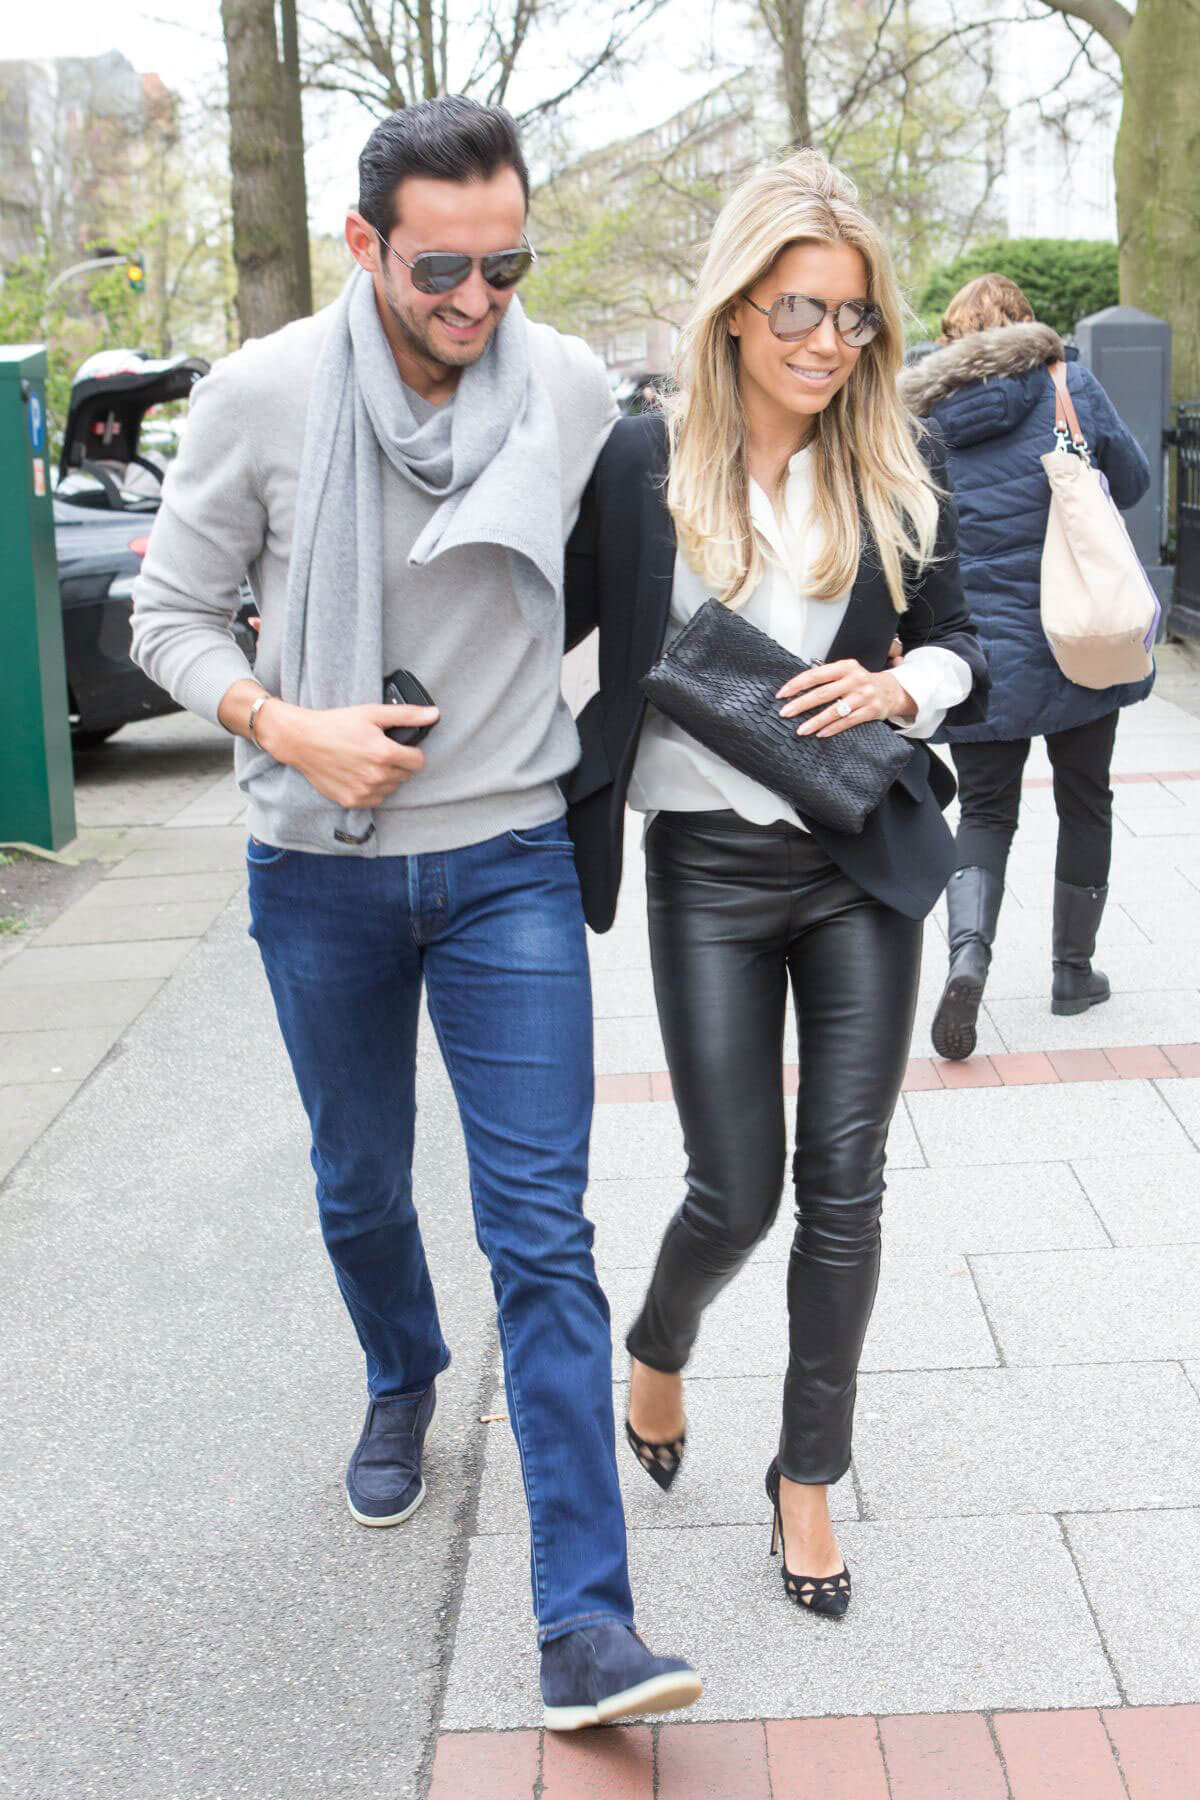 Sylvie Meis and Charbel Aouad After Engagement Night in Hamburg